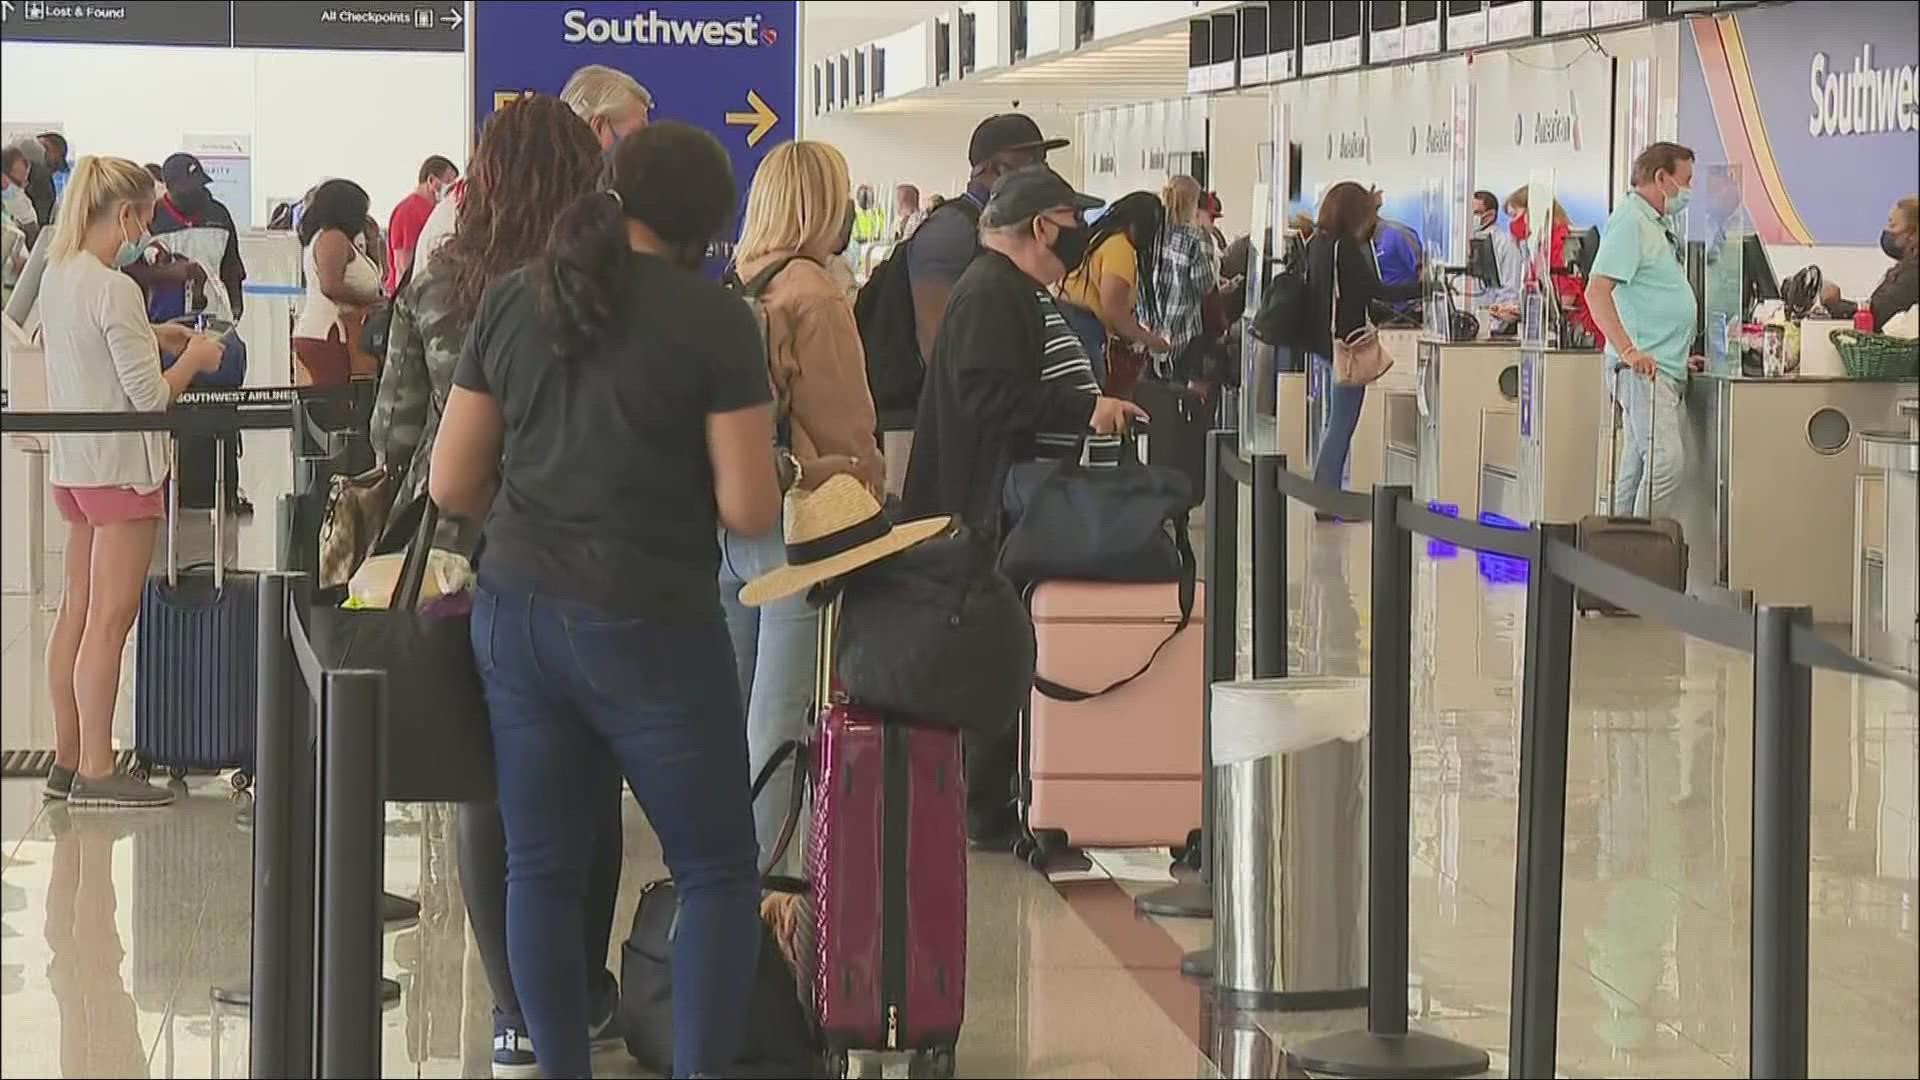 Southwest said it’s the first-of-its-kind policy among U.S. airlines and is a part of its initiative to improve the customer experience.